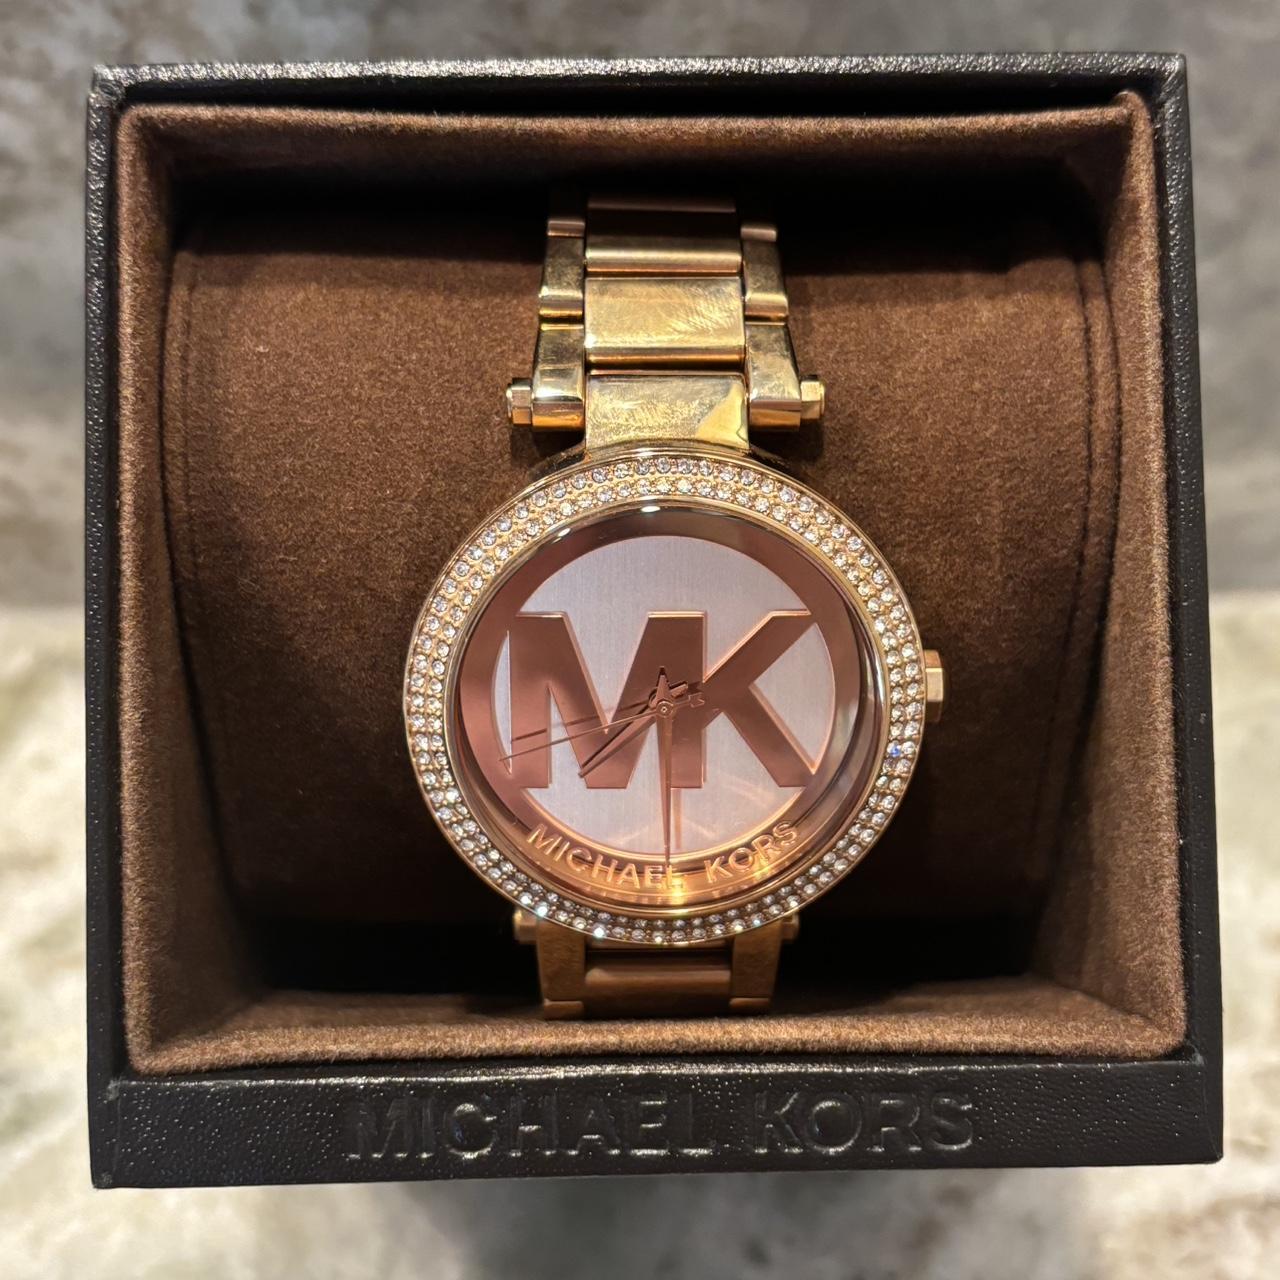 Michael Kors Watch with extra chain links - Depop